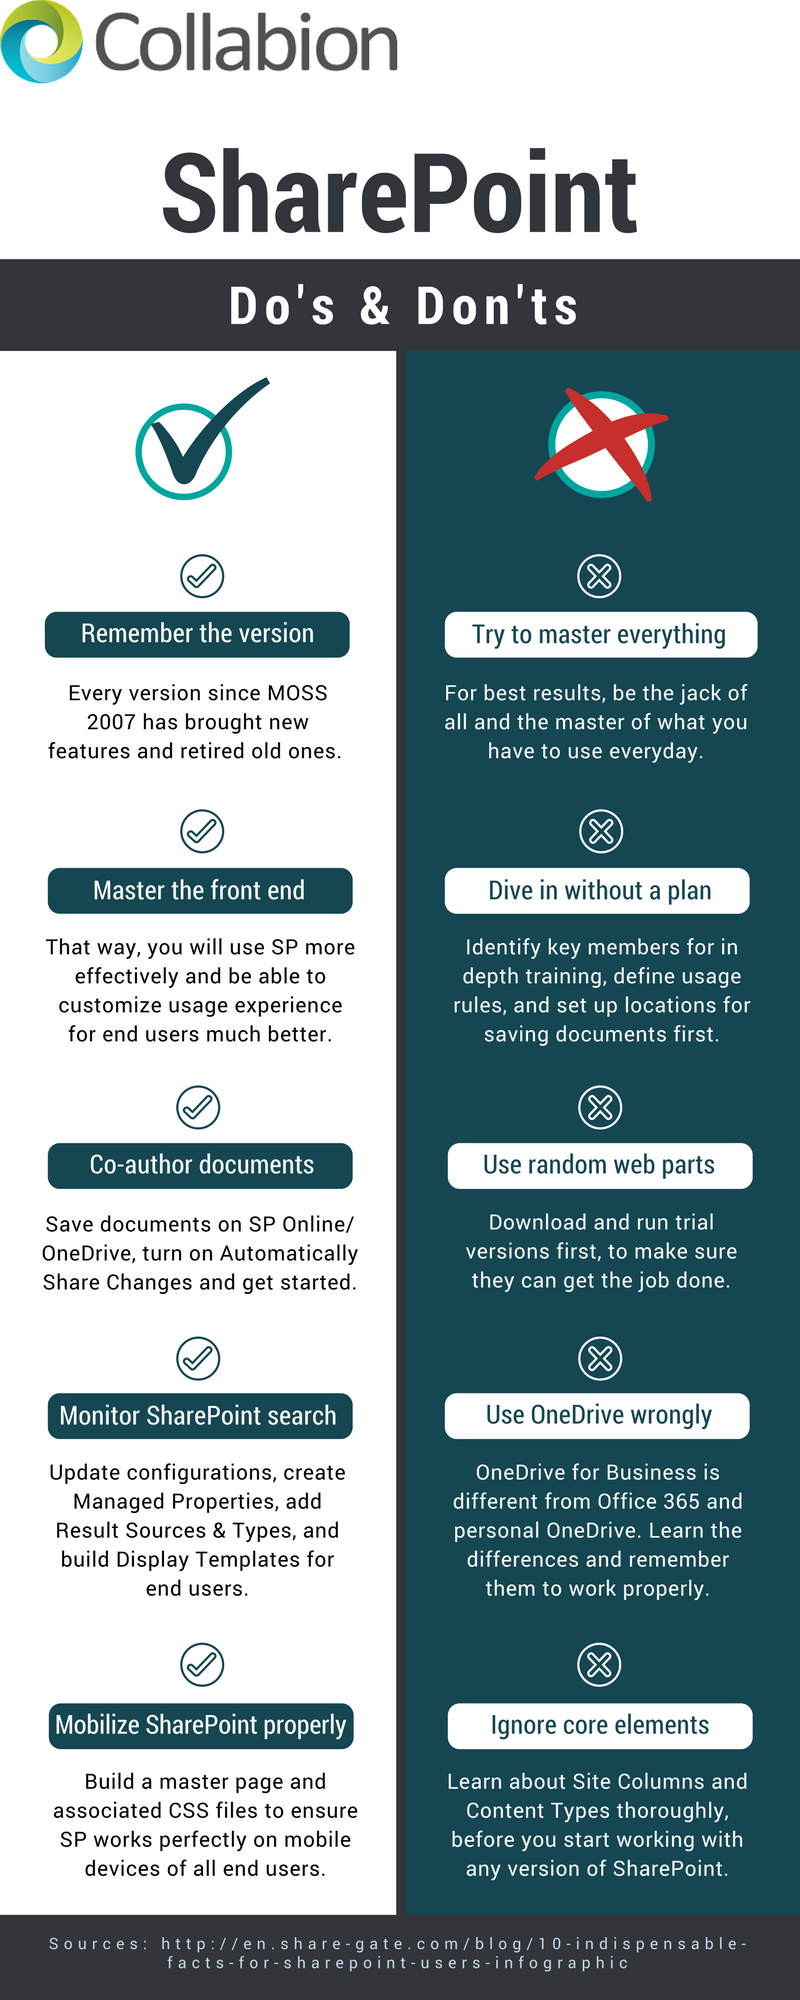 5 Do's and 5 Don'ts for SharePoint - Infographic